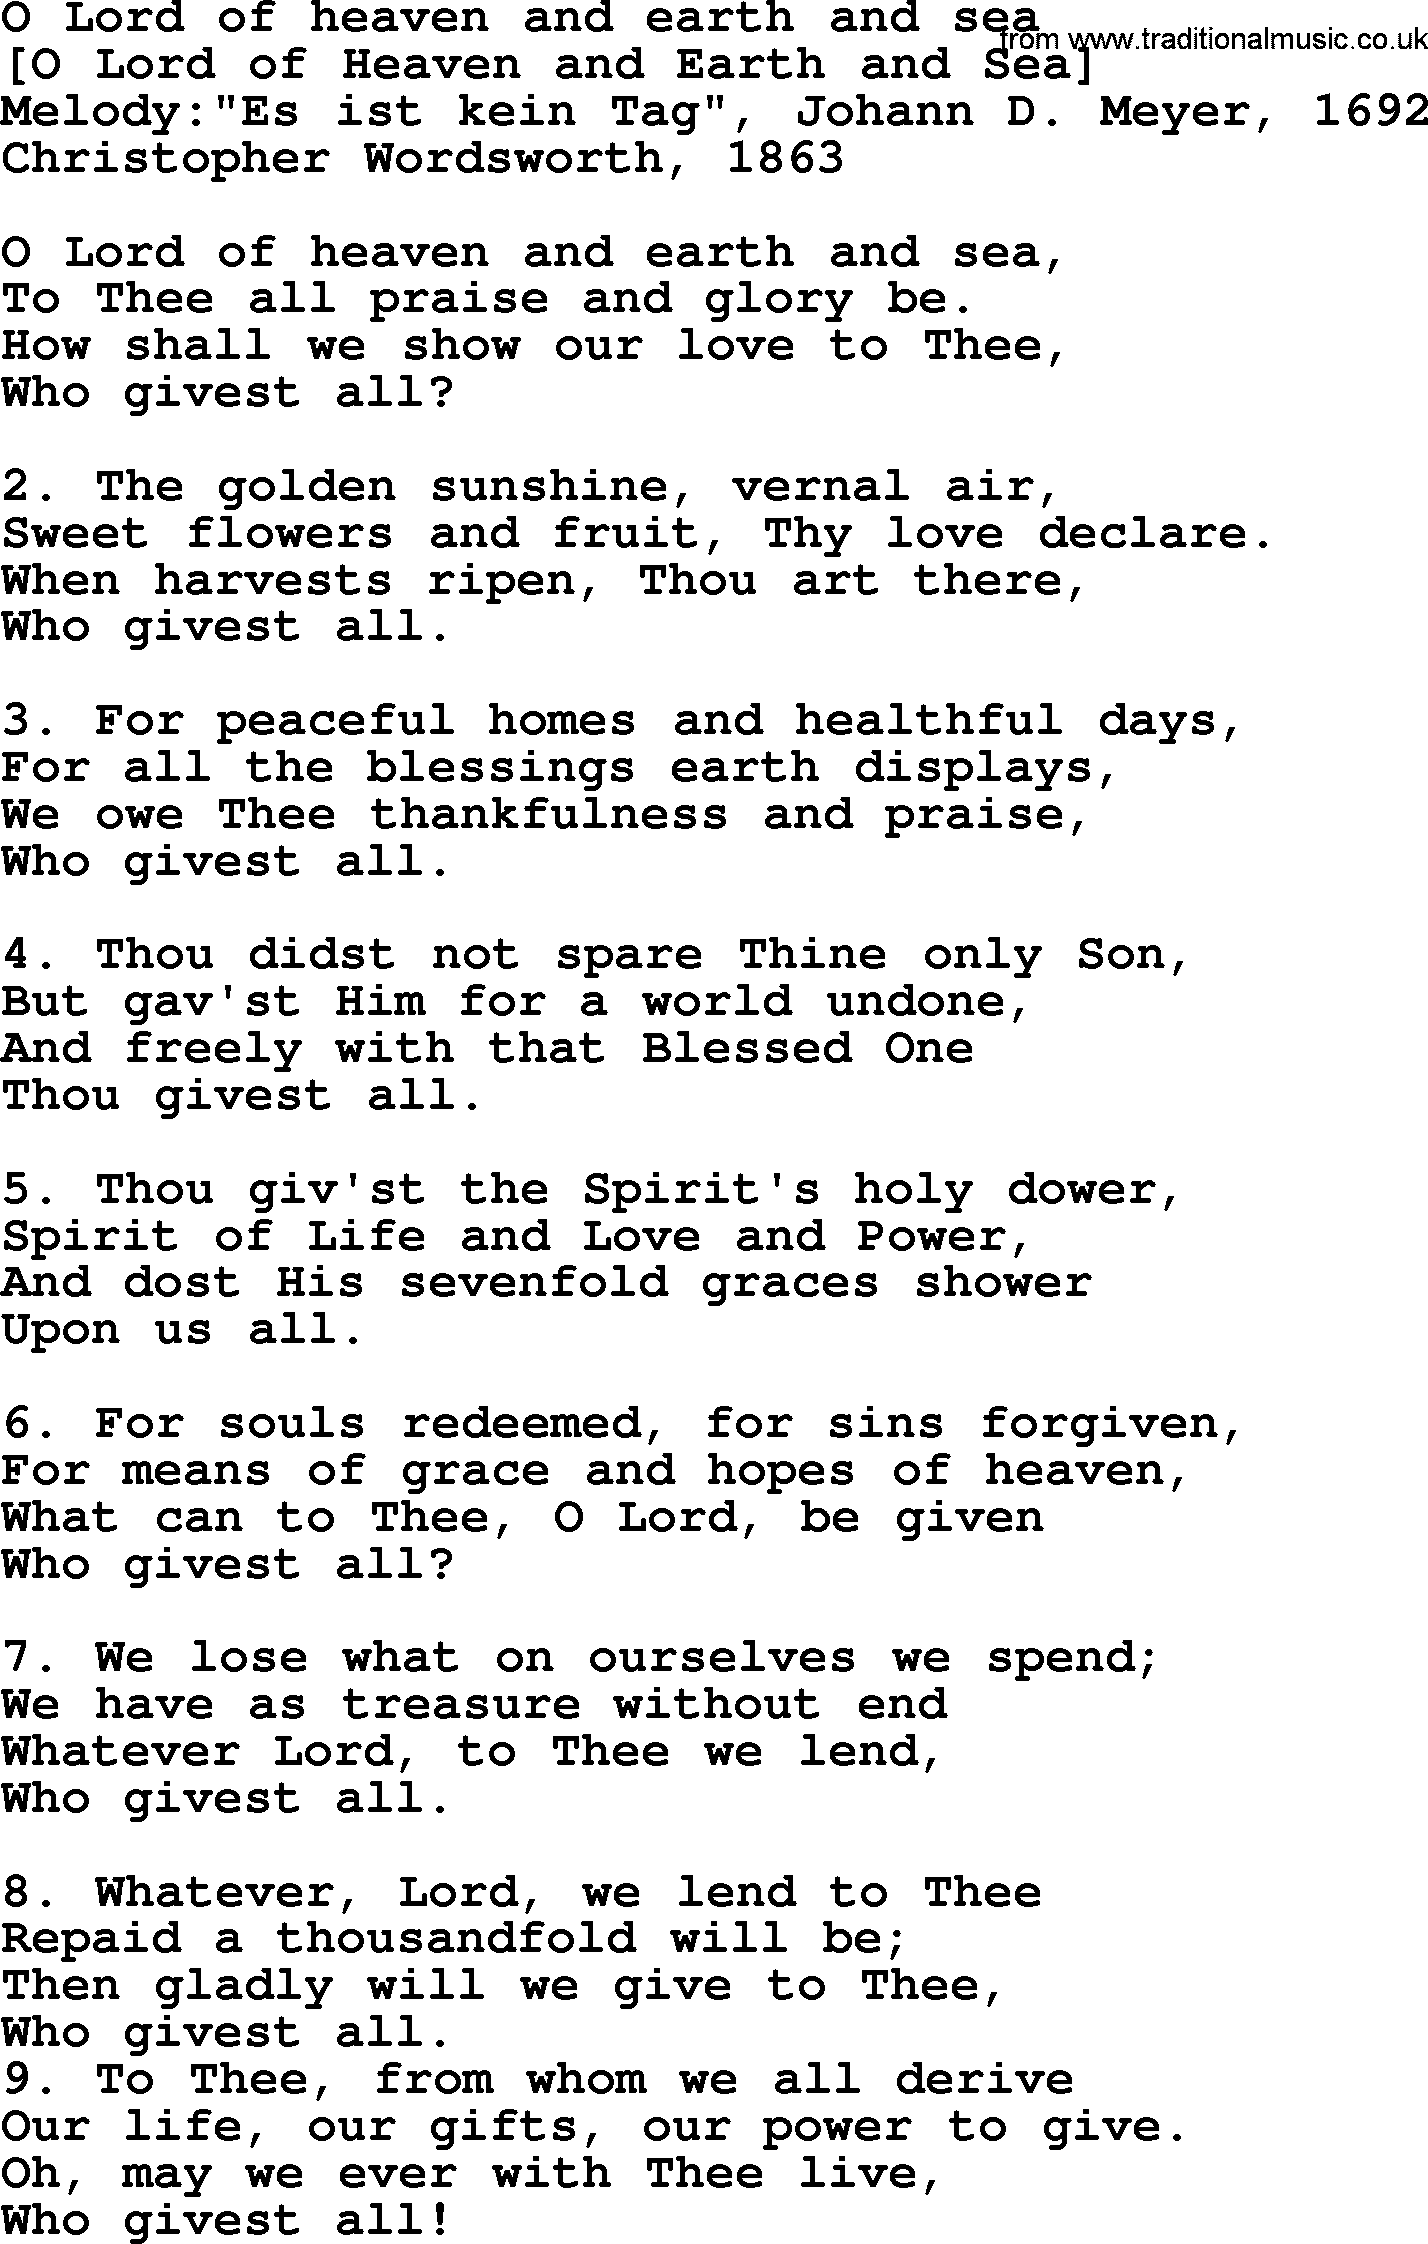 Old English Song: O Lord Of Heaven And Earth And Sea lyrics